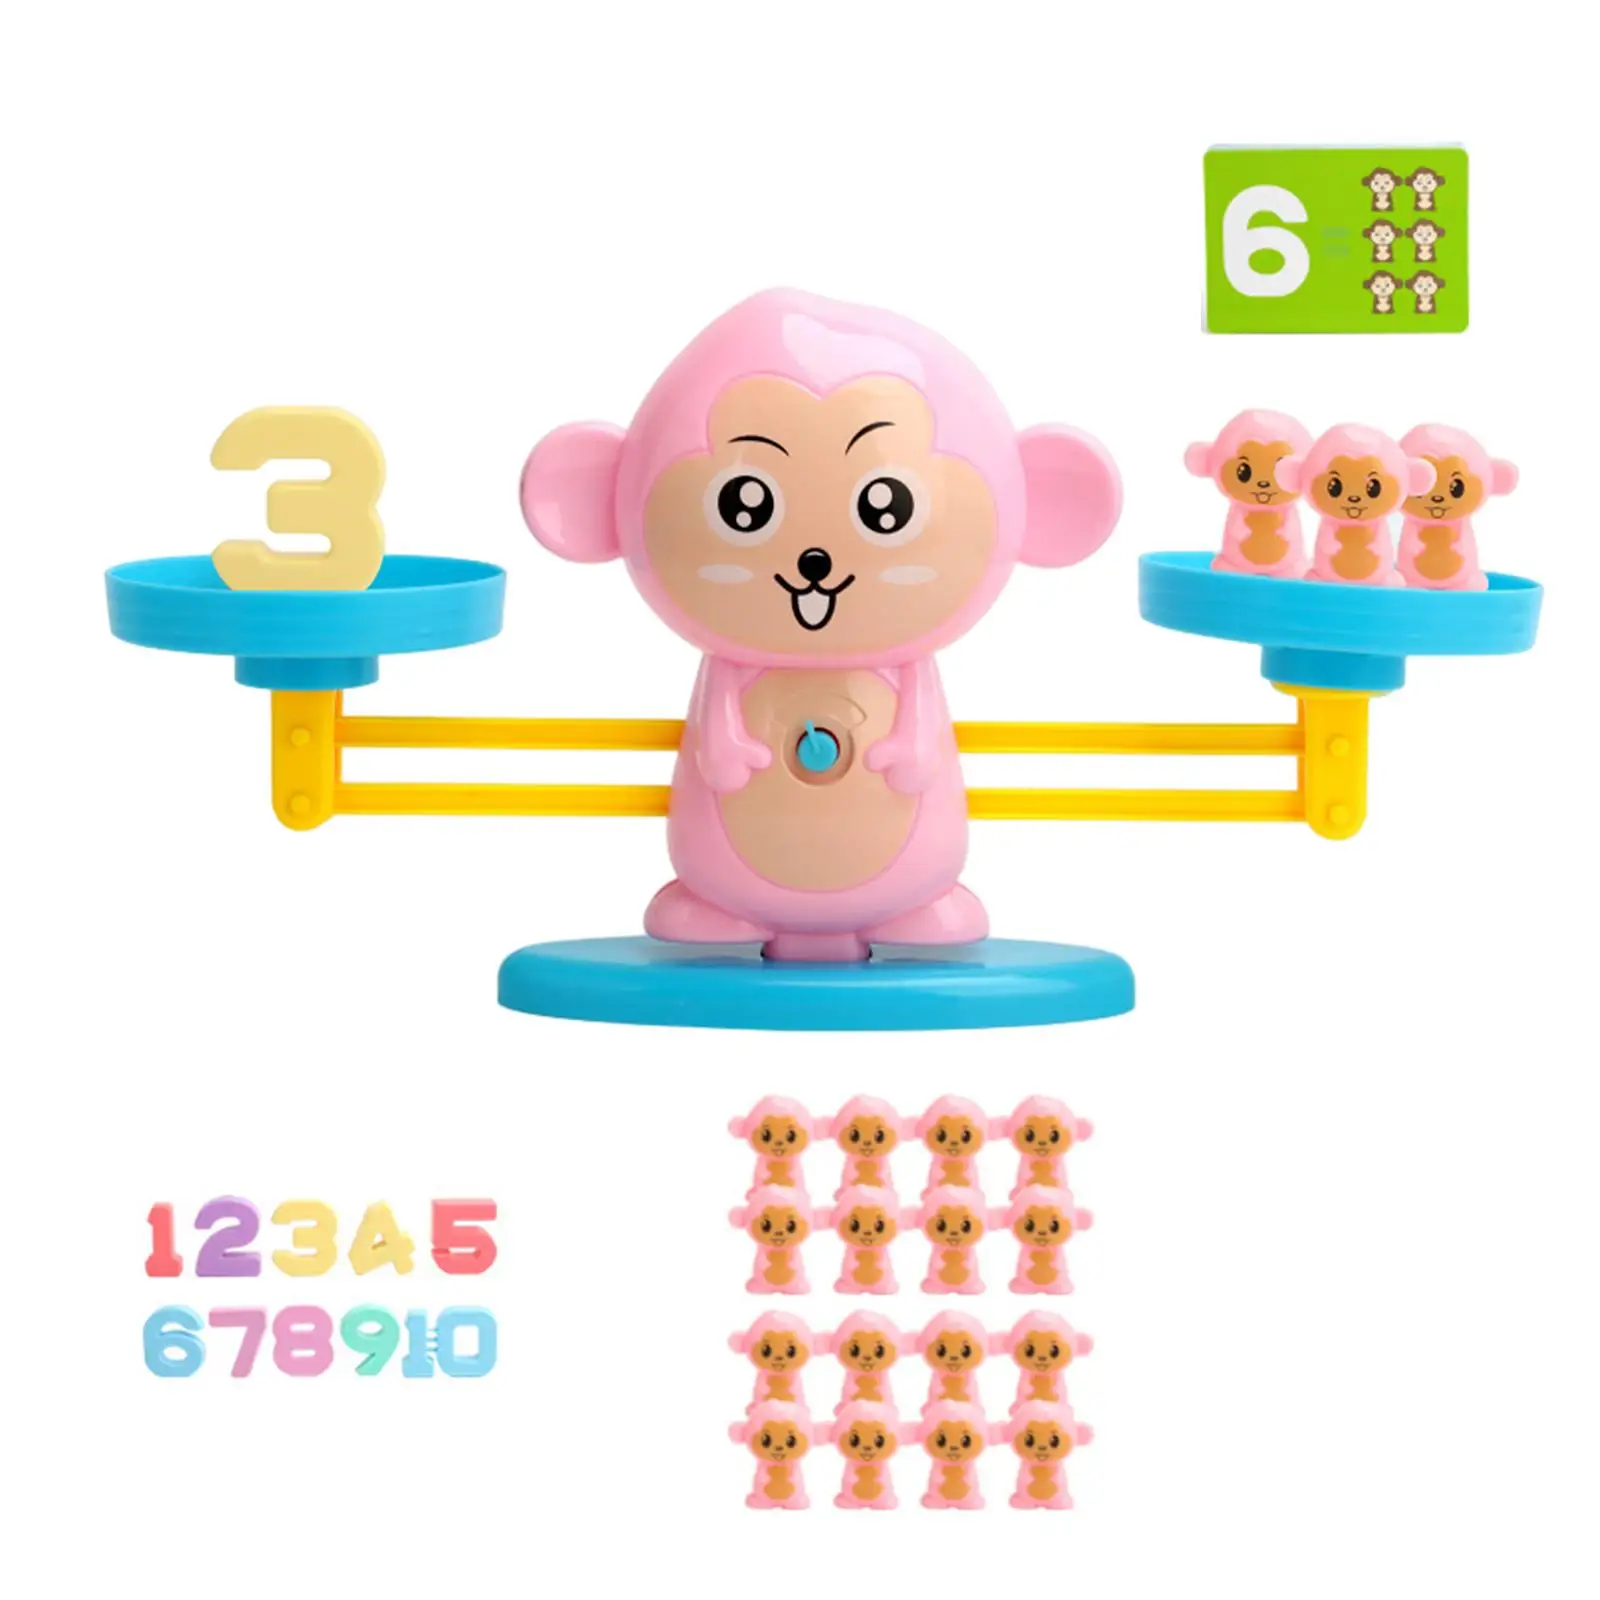 Balance Game Toy Toddler Educational Toys Children`s Birthday Gifts Balance Counting games Preschool Kids Boy Girl